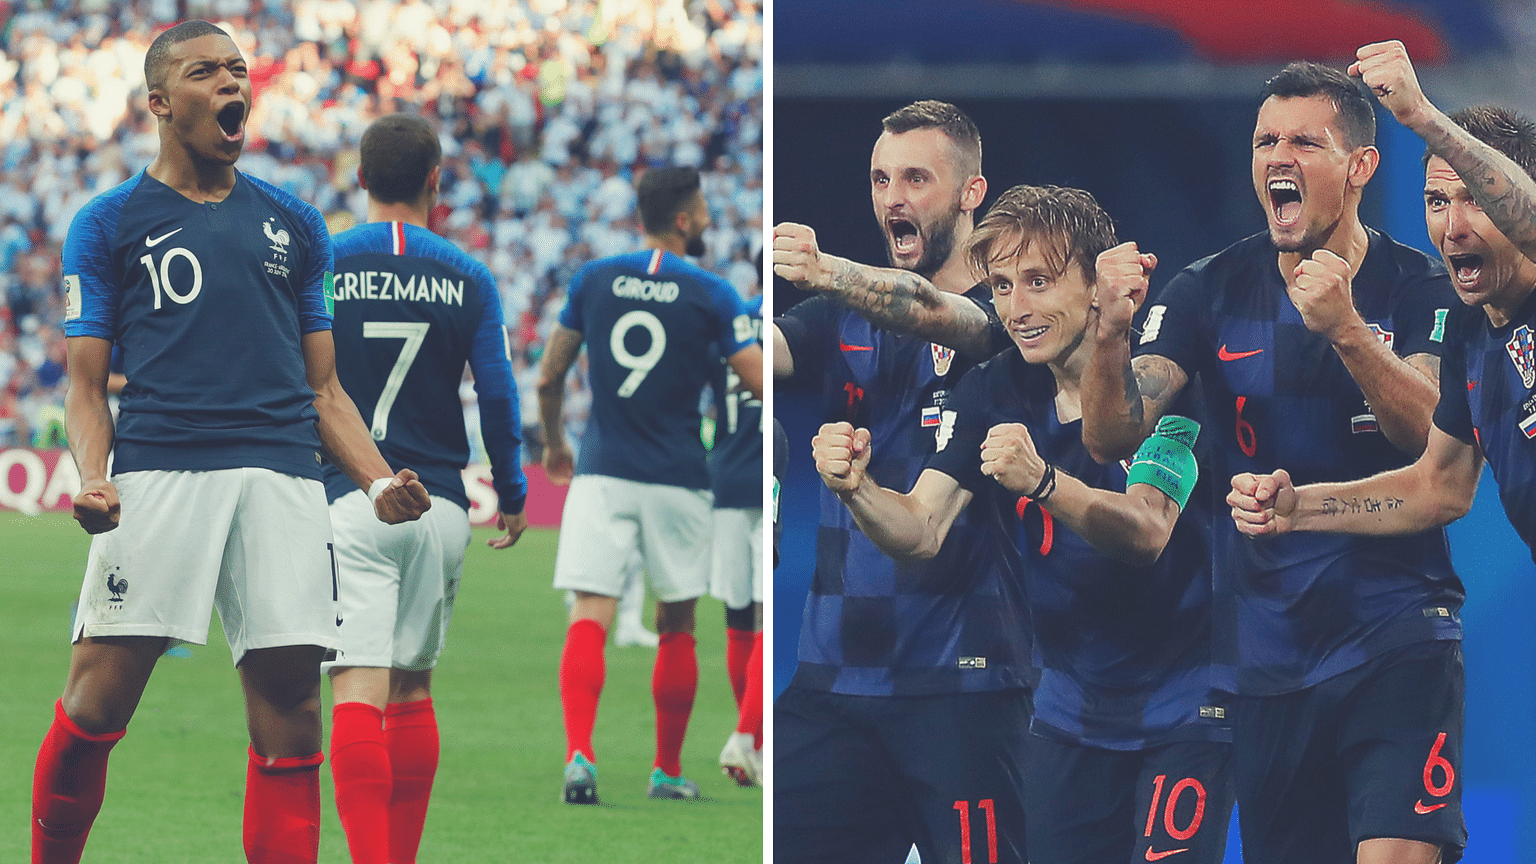 France (left) are appearing in their third final while Croatia will make their maiden appearance.